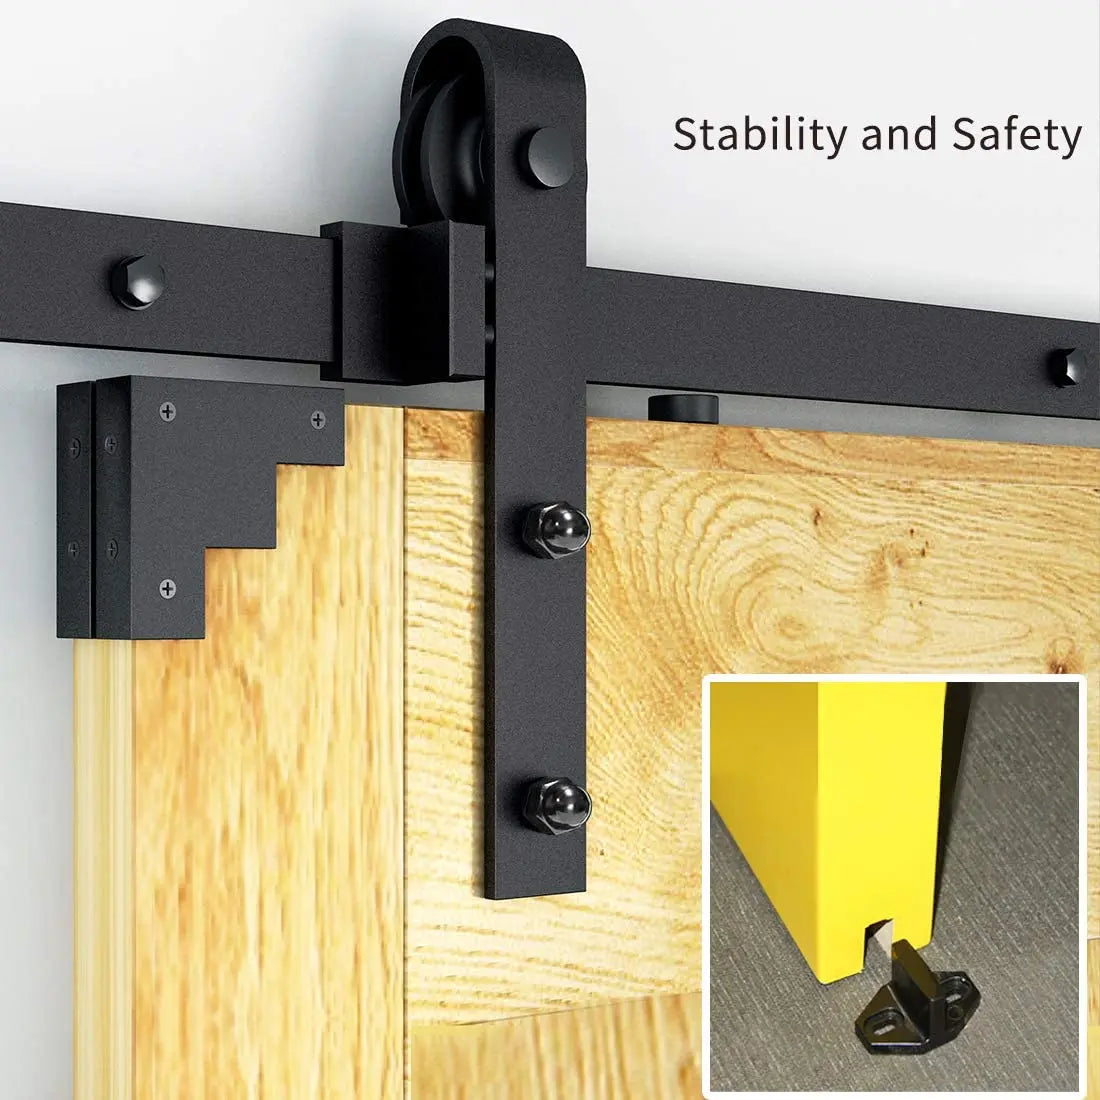 stable and safe barn door hardware kit